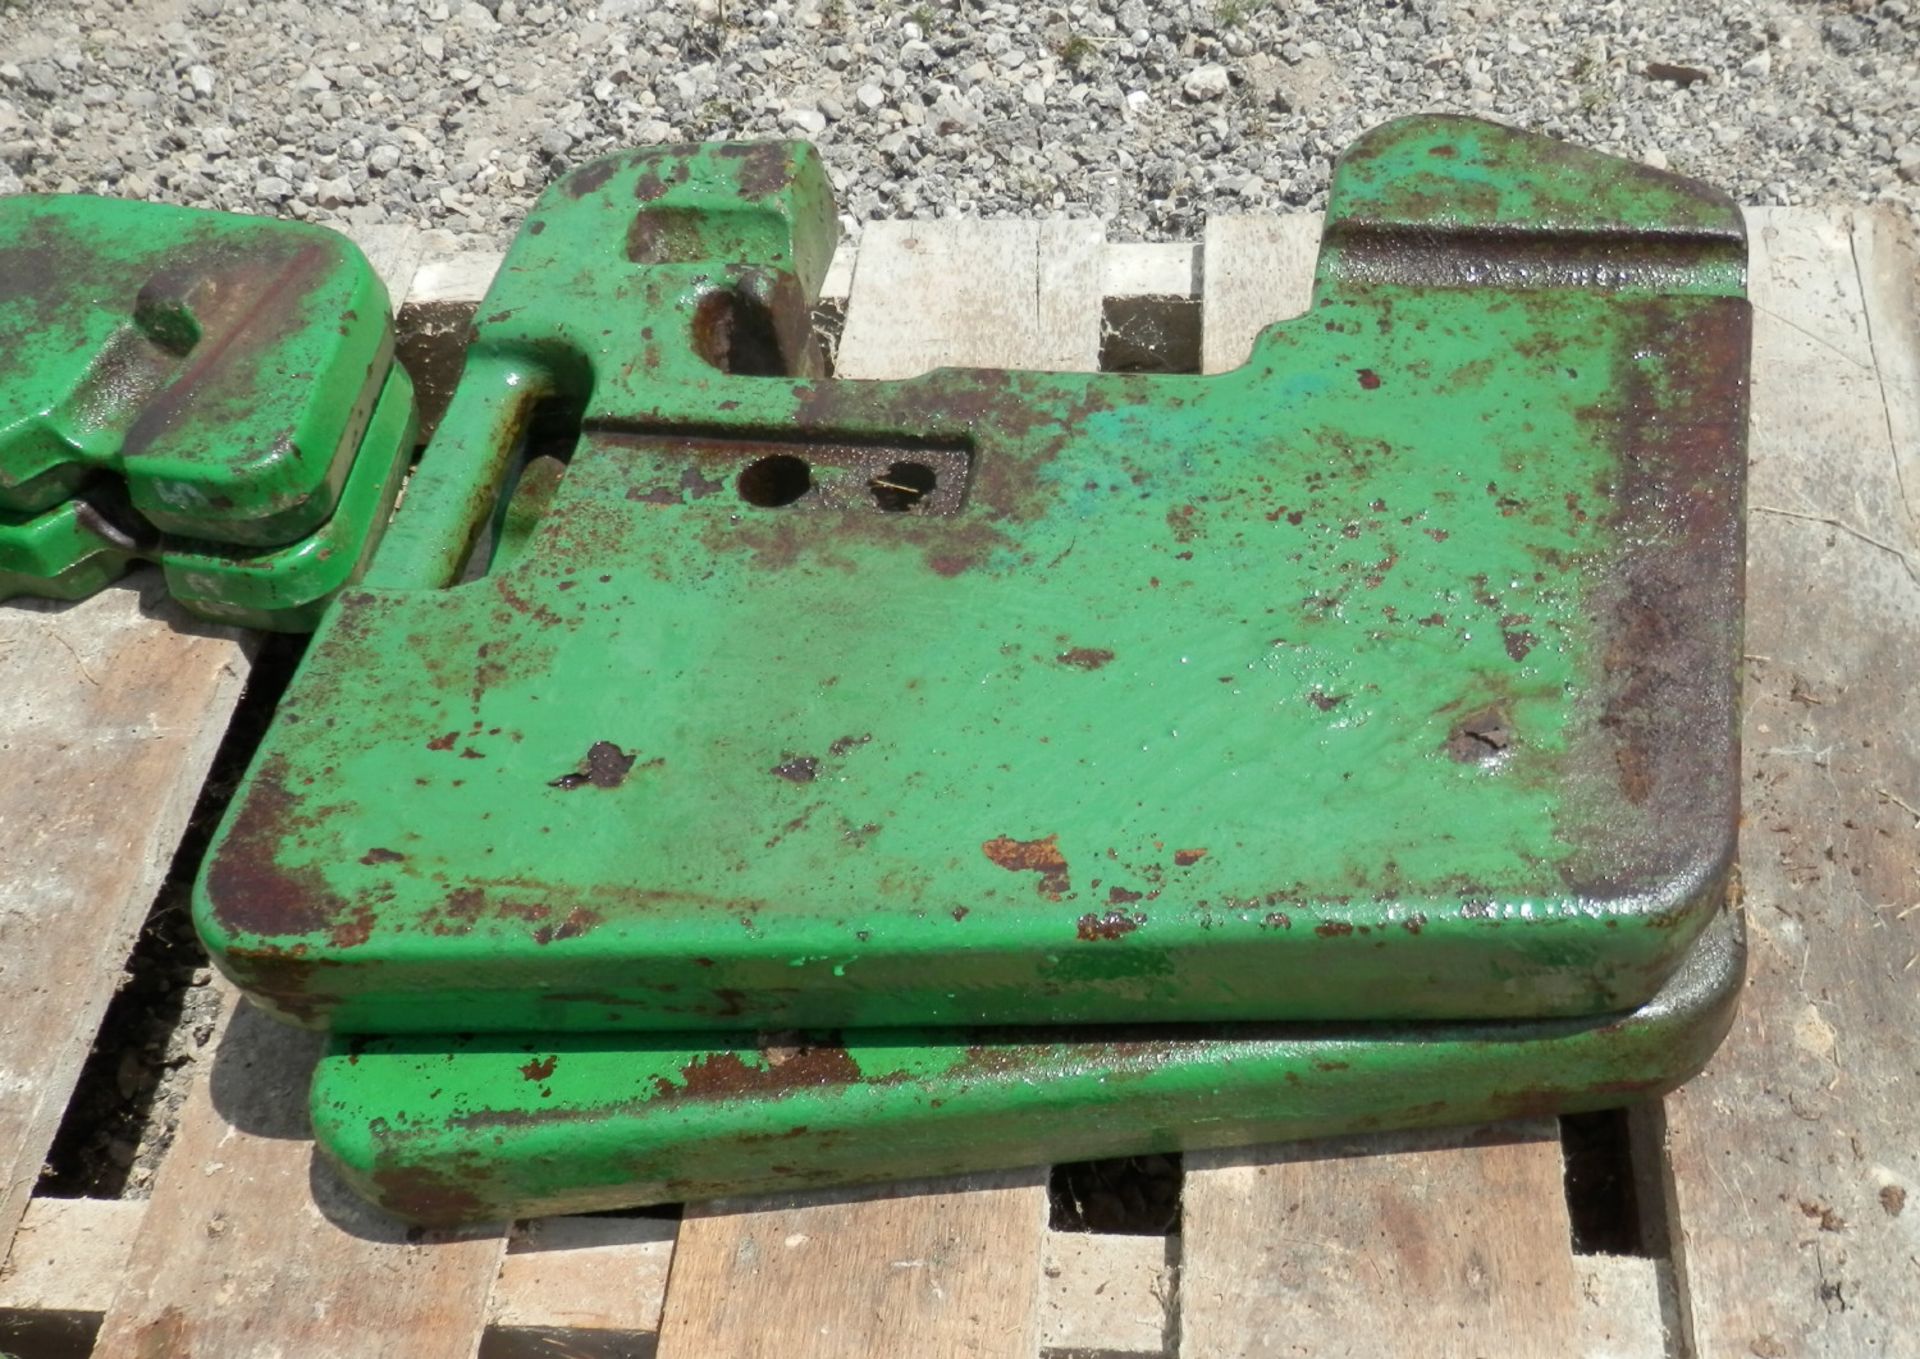 JOHN DEERE SUITCASE WEIGHTS, OLDER STYLE SELLING CHOICE PER WEIGHT